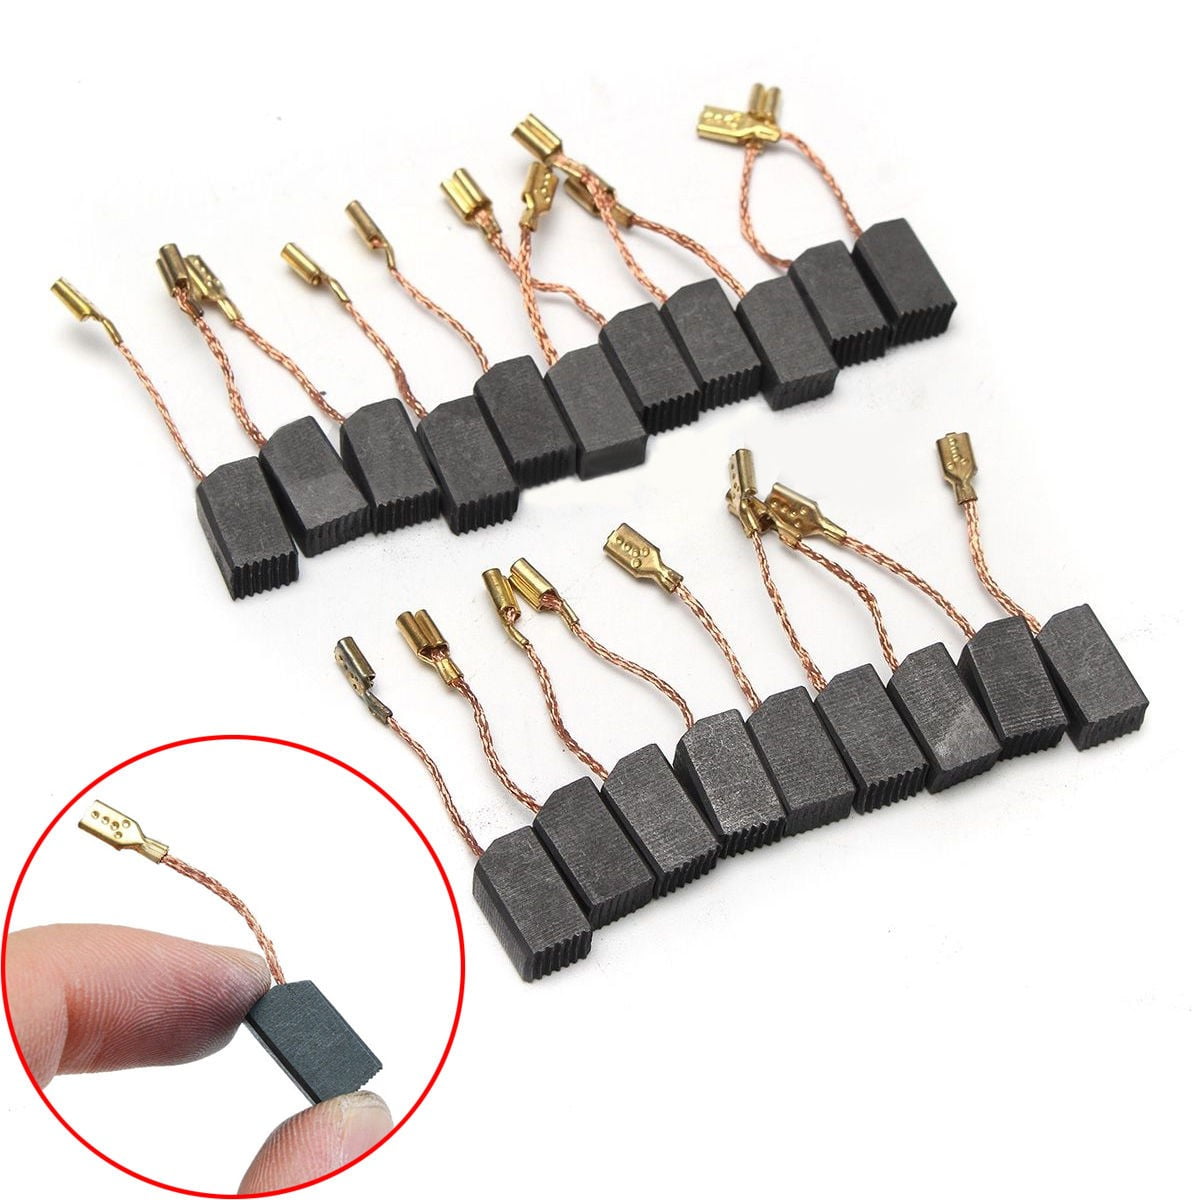 20Pcs/set Motor Carbon Brushes Set For Electric Drill Angle Grinder 6 X 8 X 14mm 